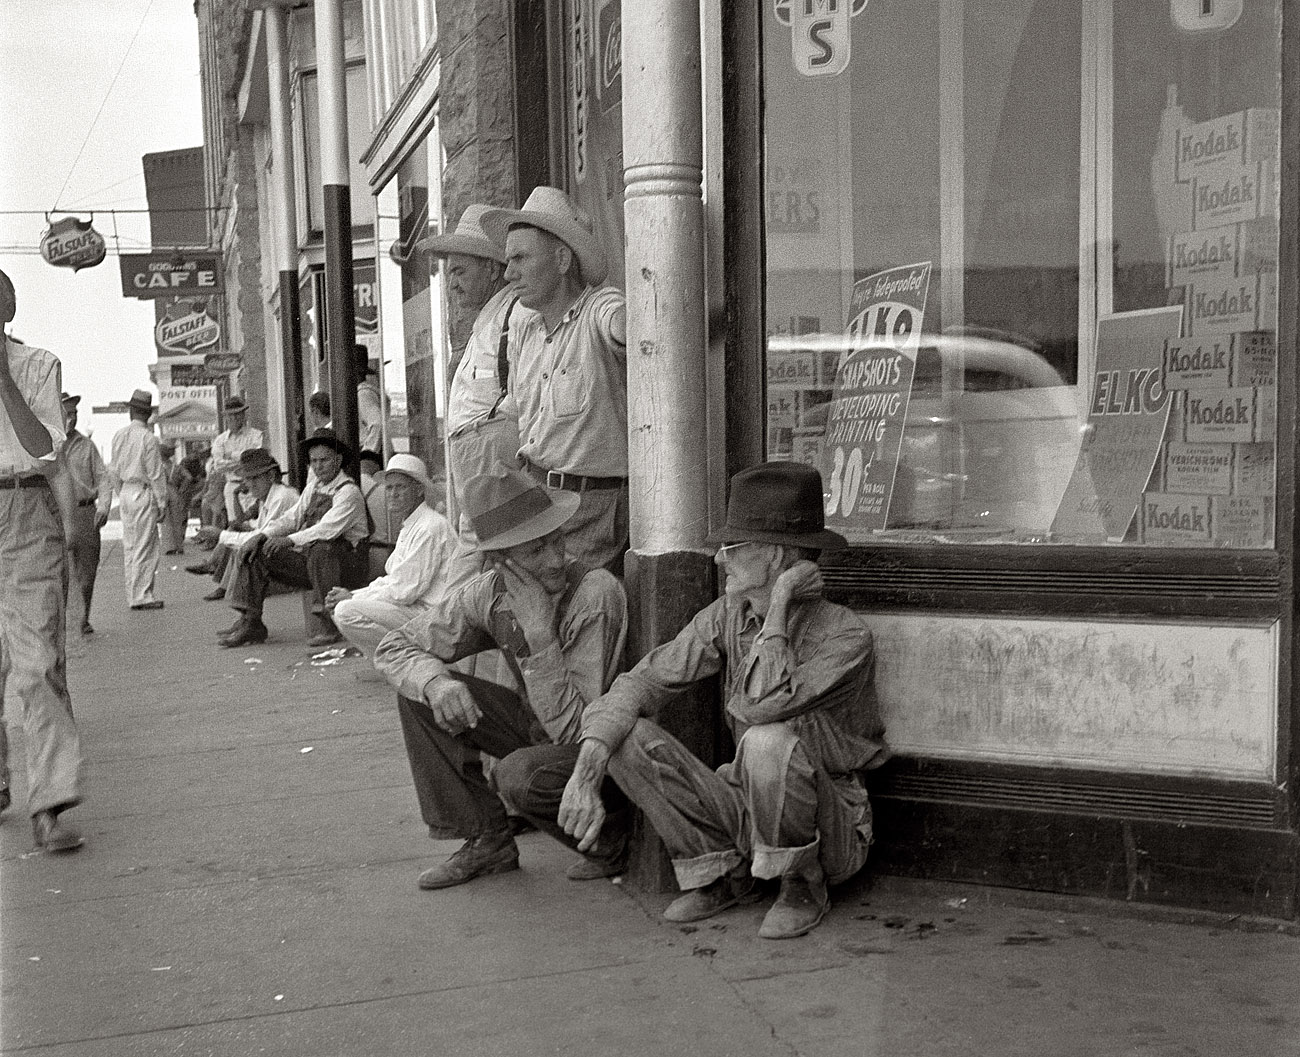 August 1936. Sallisaw, Oklahoma. Sequoyah County drought farmers. "Nothing to do," said one of them. "These fellers are goin' to stay right here till they dry up and die." View full size. Medium-format nitrate negative by Dorothea Lange.